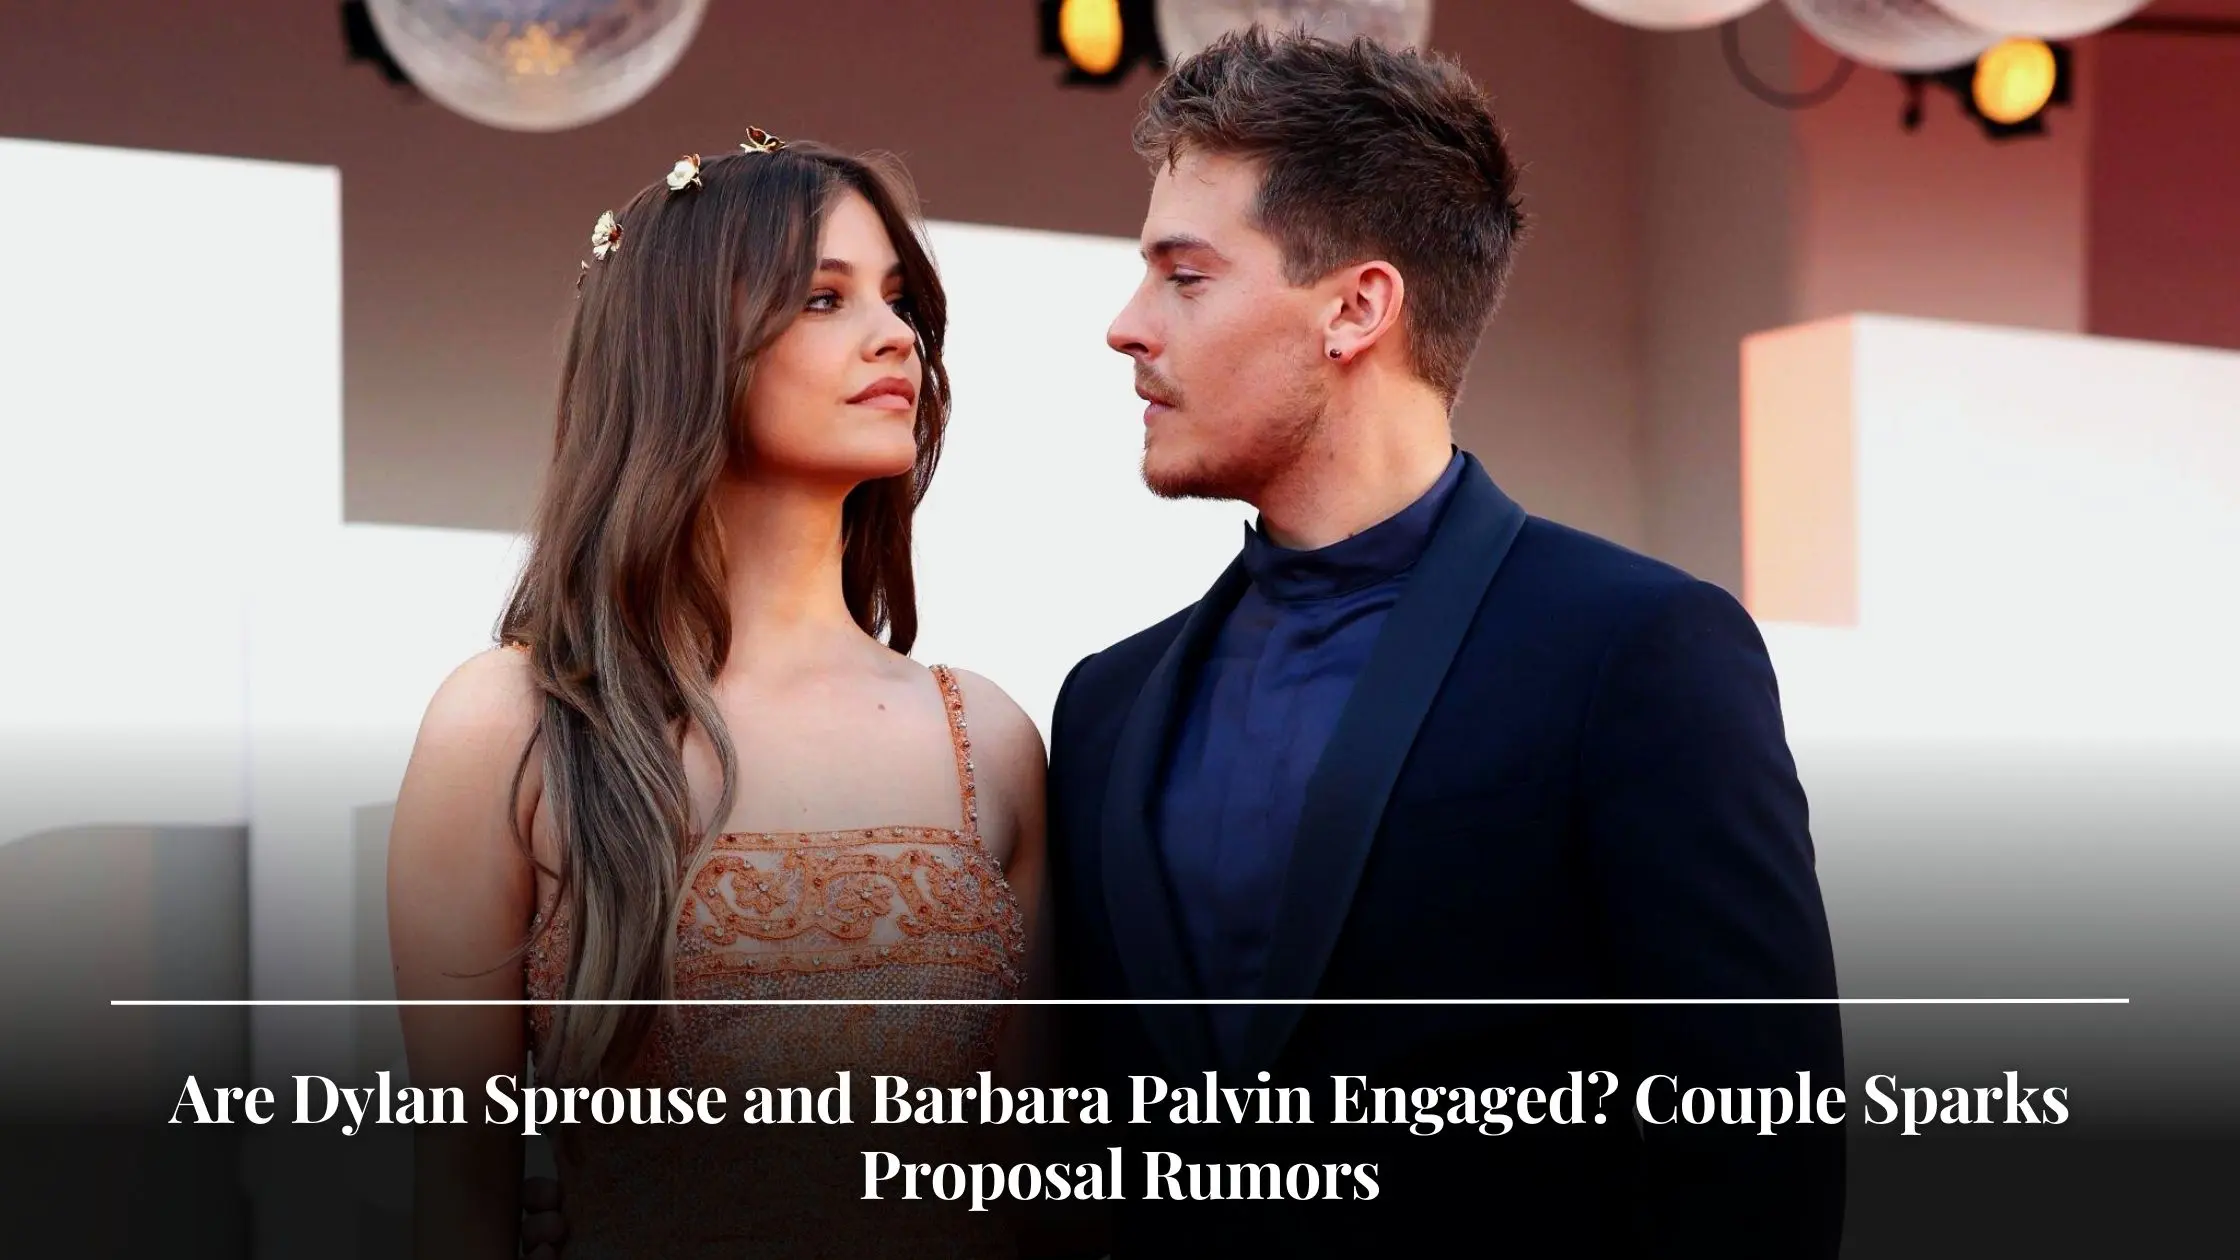 Are Dylan Sprouse and Barbara Palvin Engaged Couple Sparks Proposal Rumors